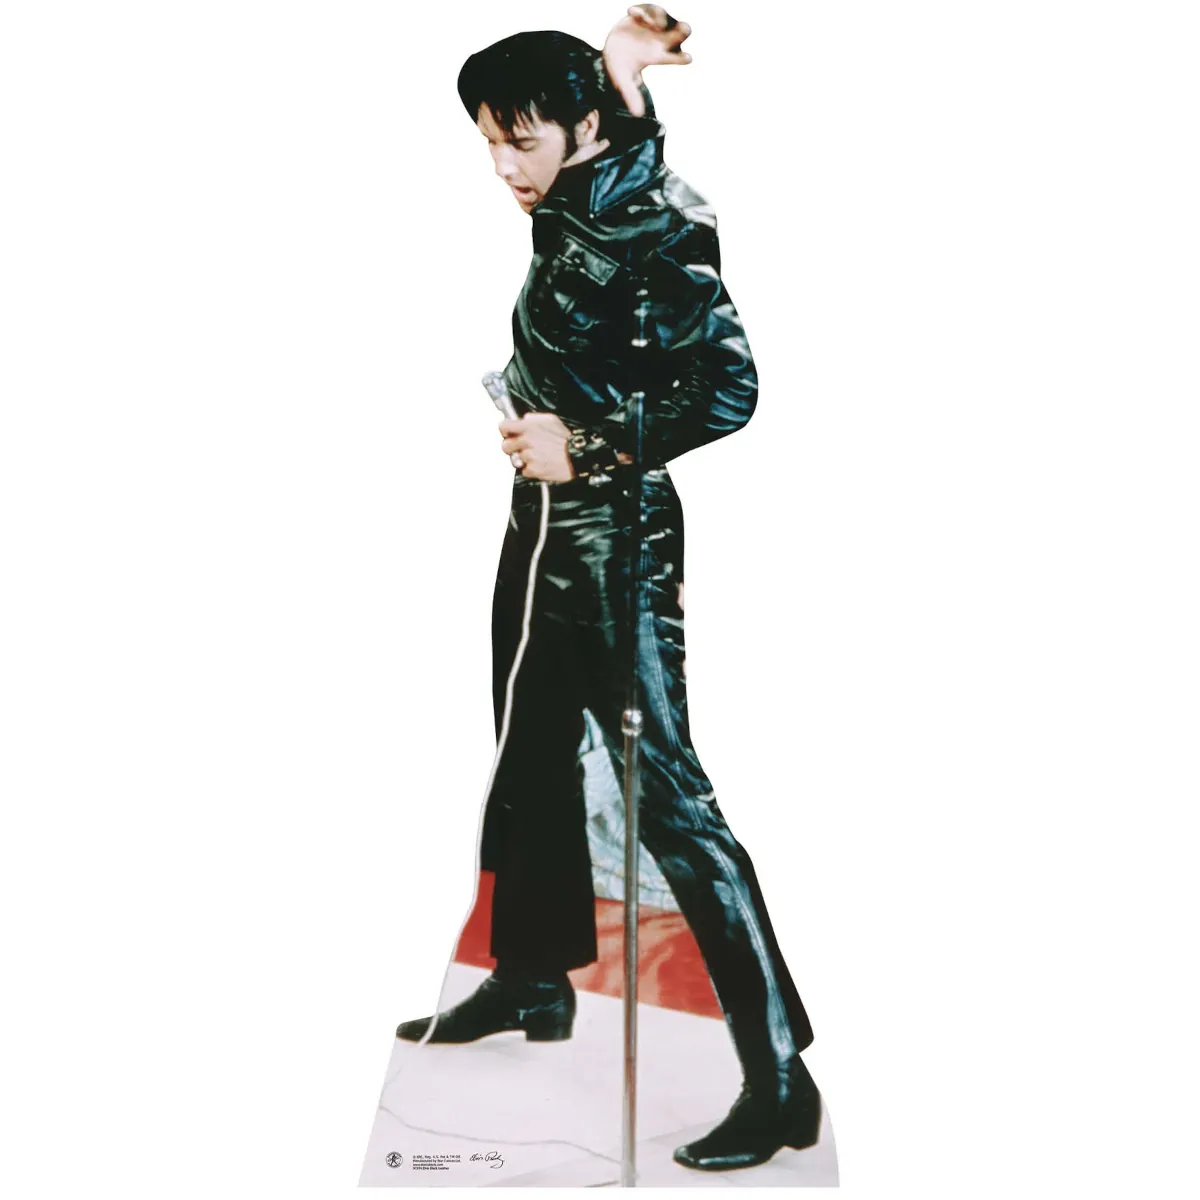 SC594 Elvis Presley 'Black Leather' (American Singer) Official Lifesize Cardboard Cutout Standee Front